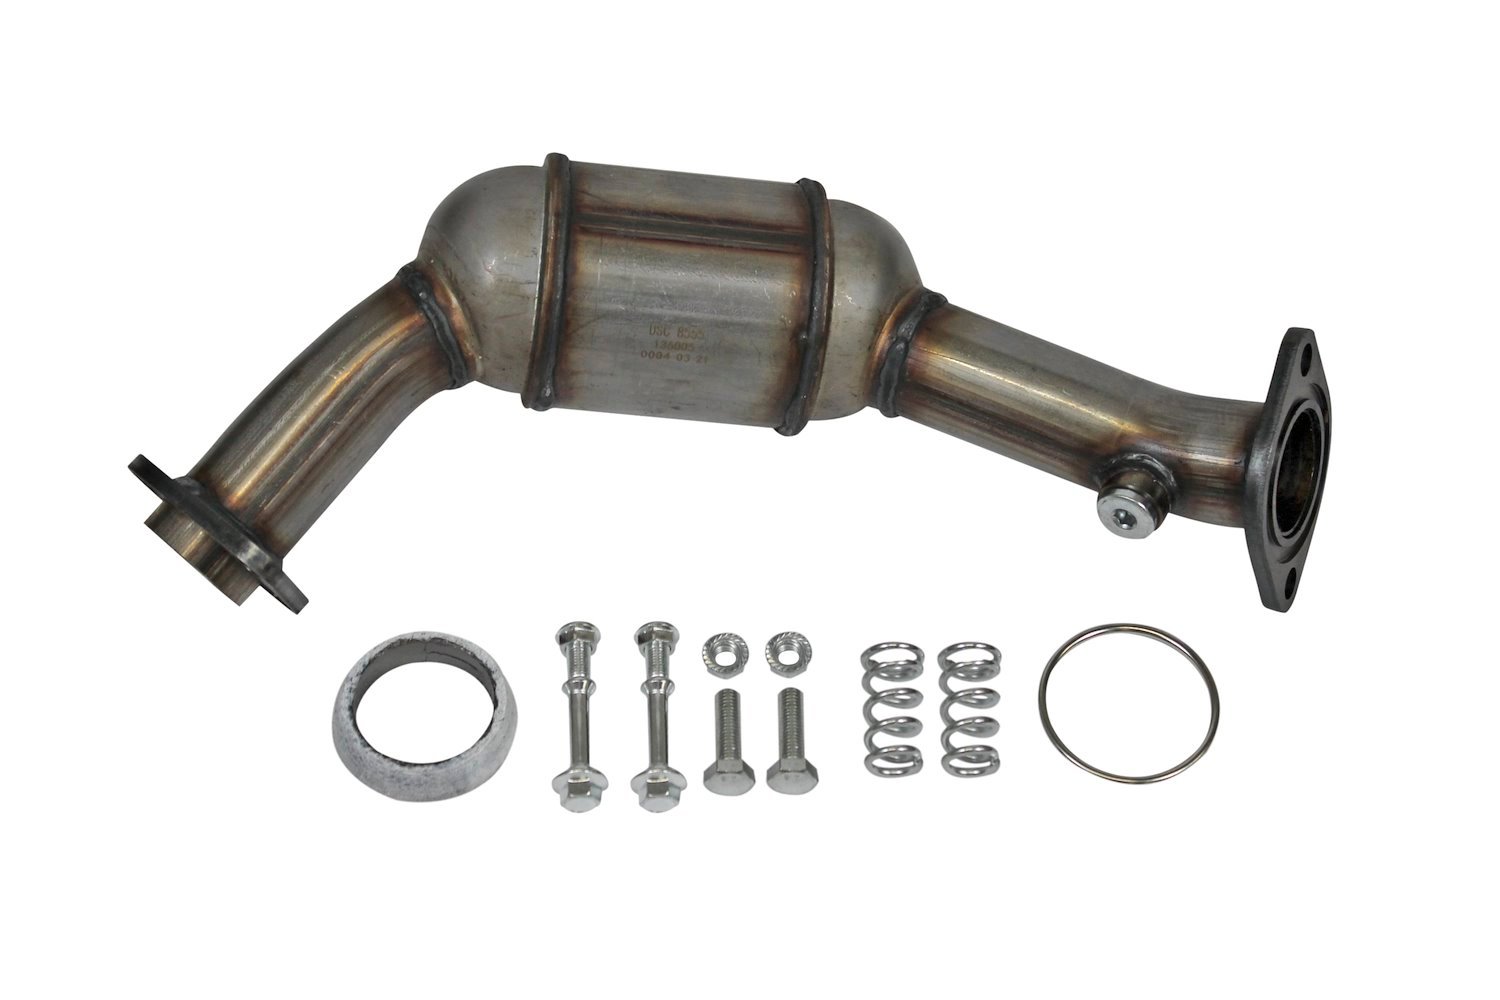 Catalytic Converter Fits 2004-2006 Cadillac CTS w/3.6L V6 Eng., 2005-2007 Cadillac CTS w/2.8L V6 Eng. [Front Right]